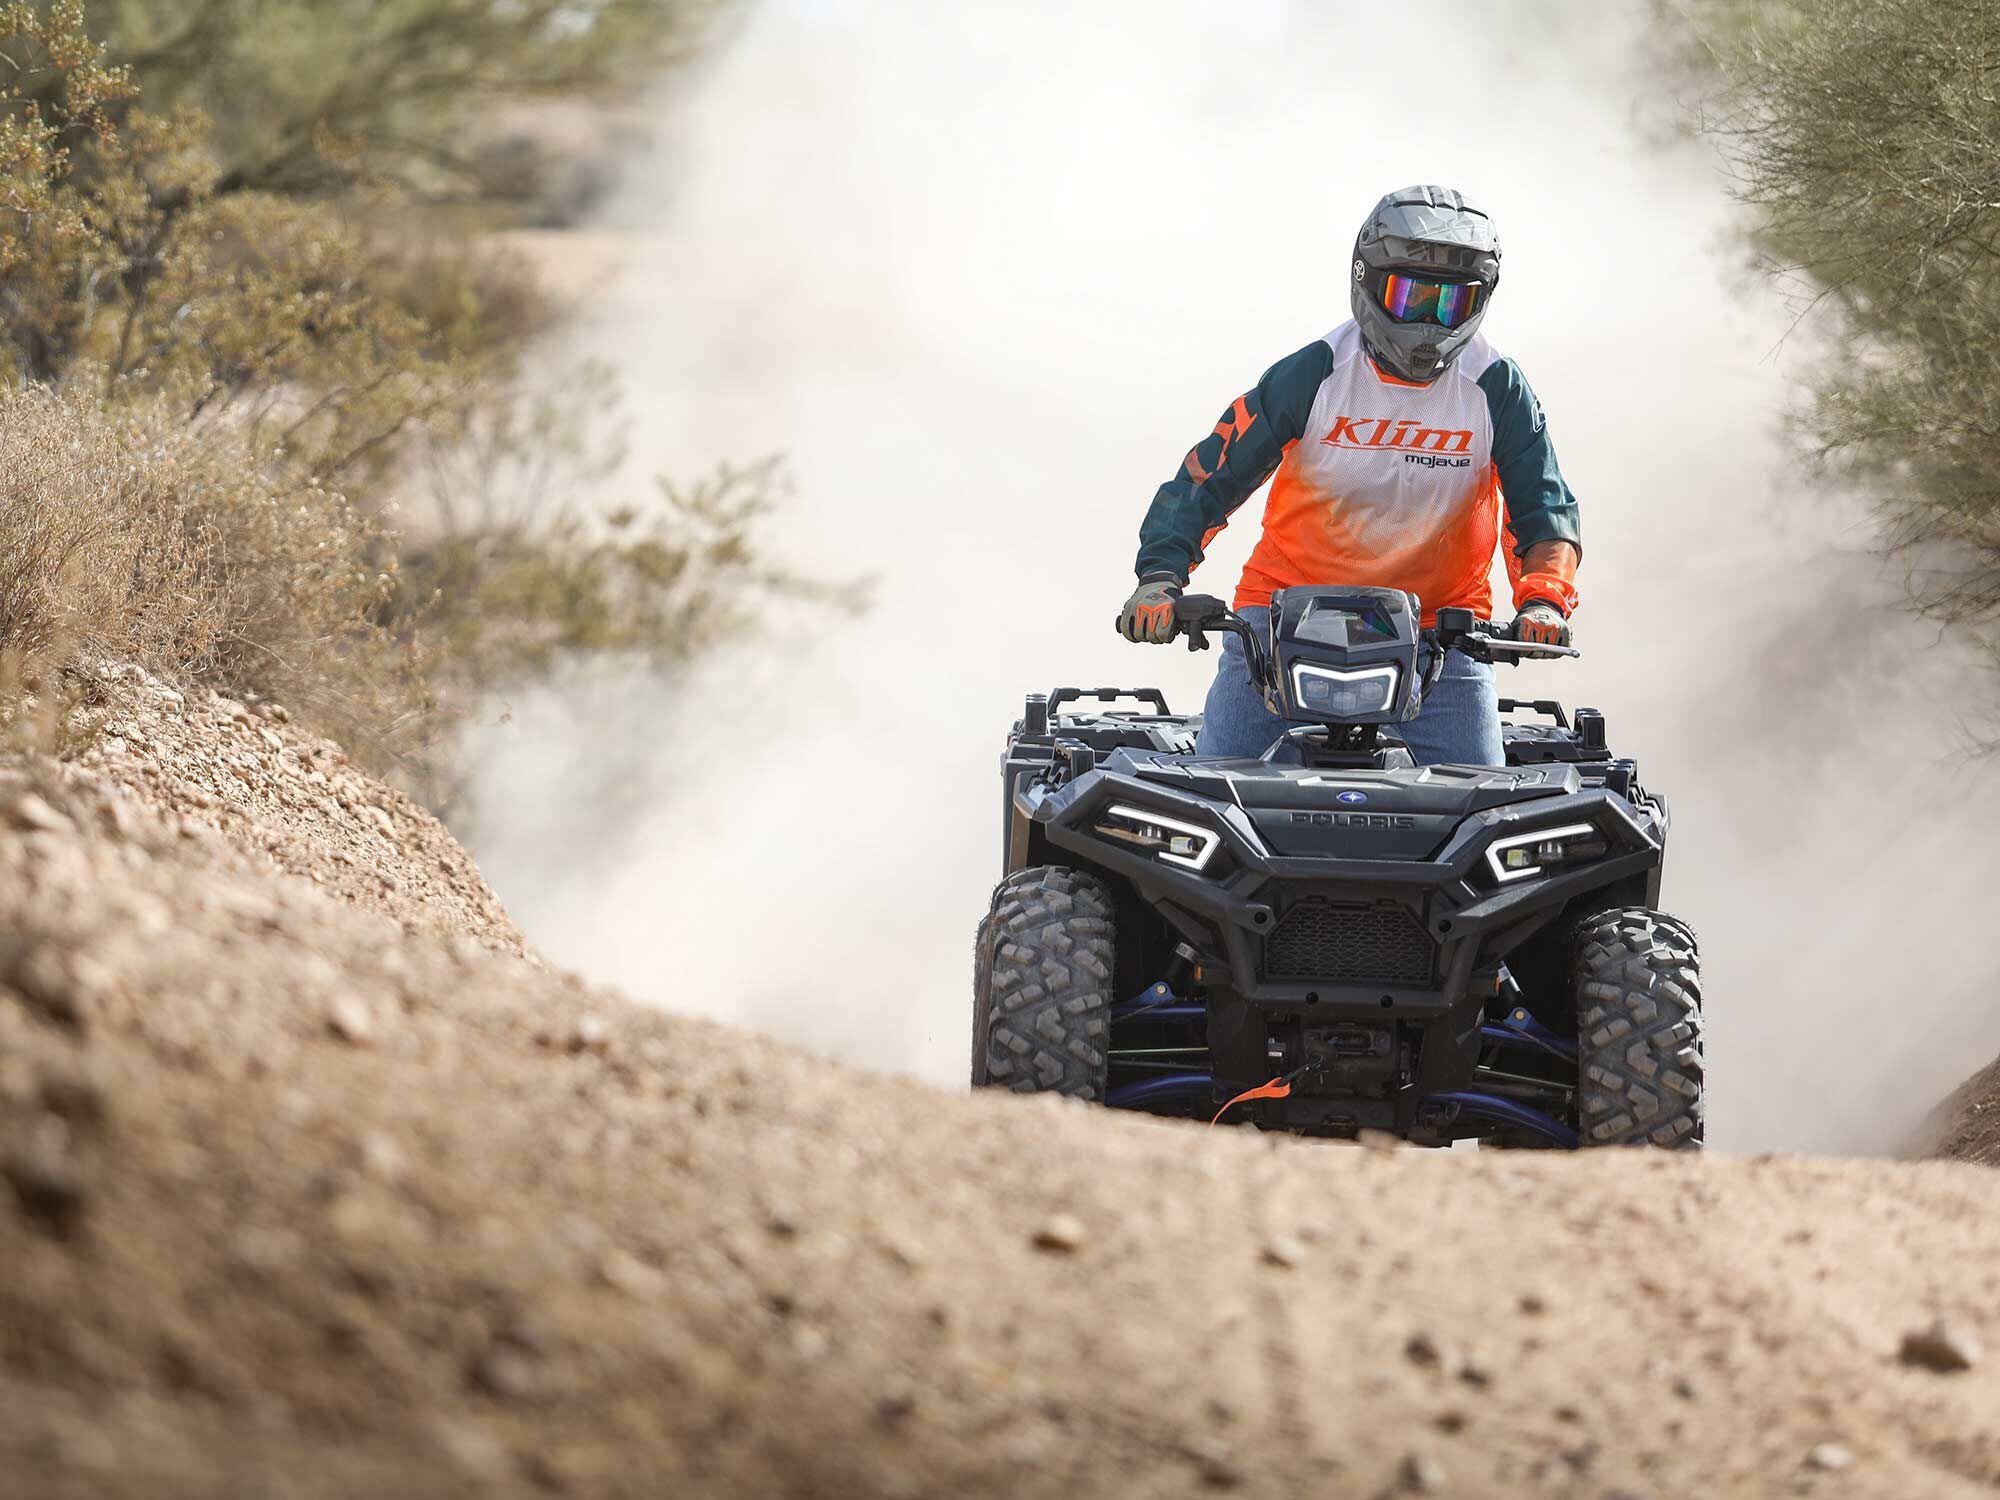 The 2022 Polaris Sportsman XP 1000 is all-day comfortable and perfect for multi-day excursions.